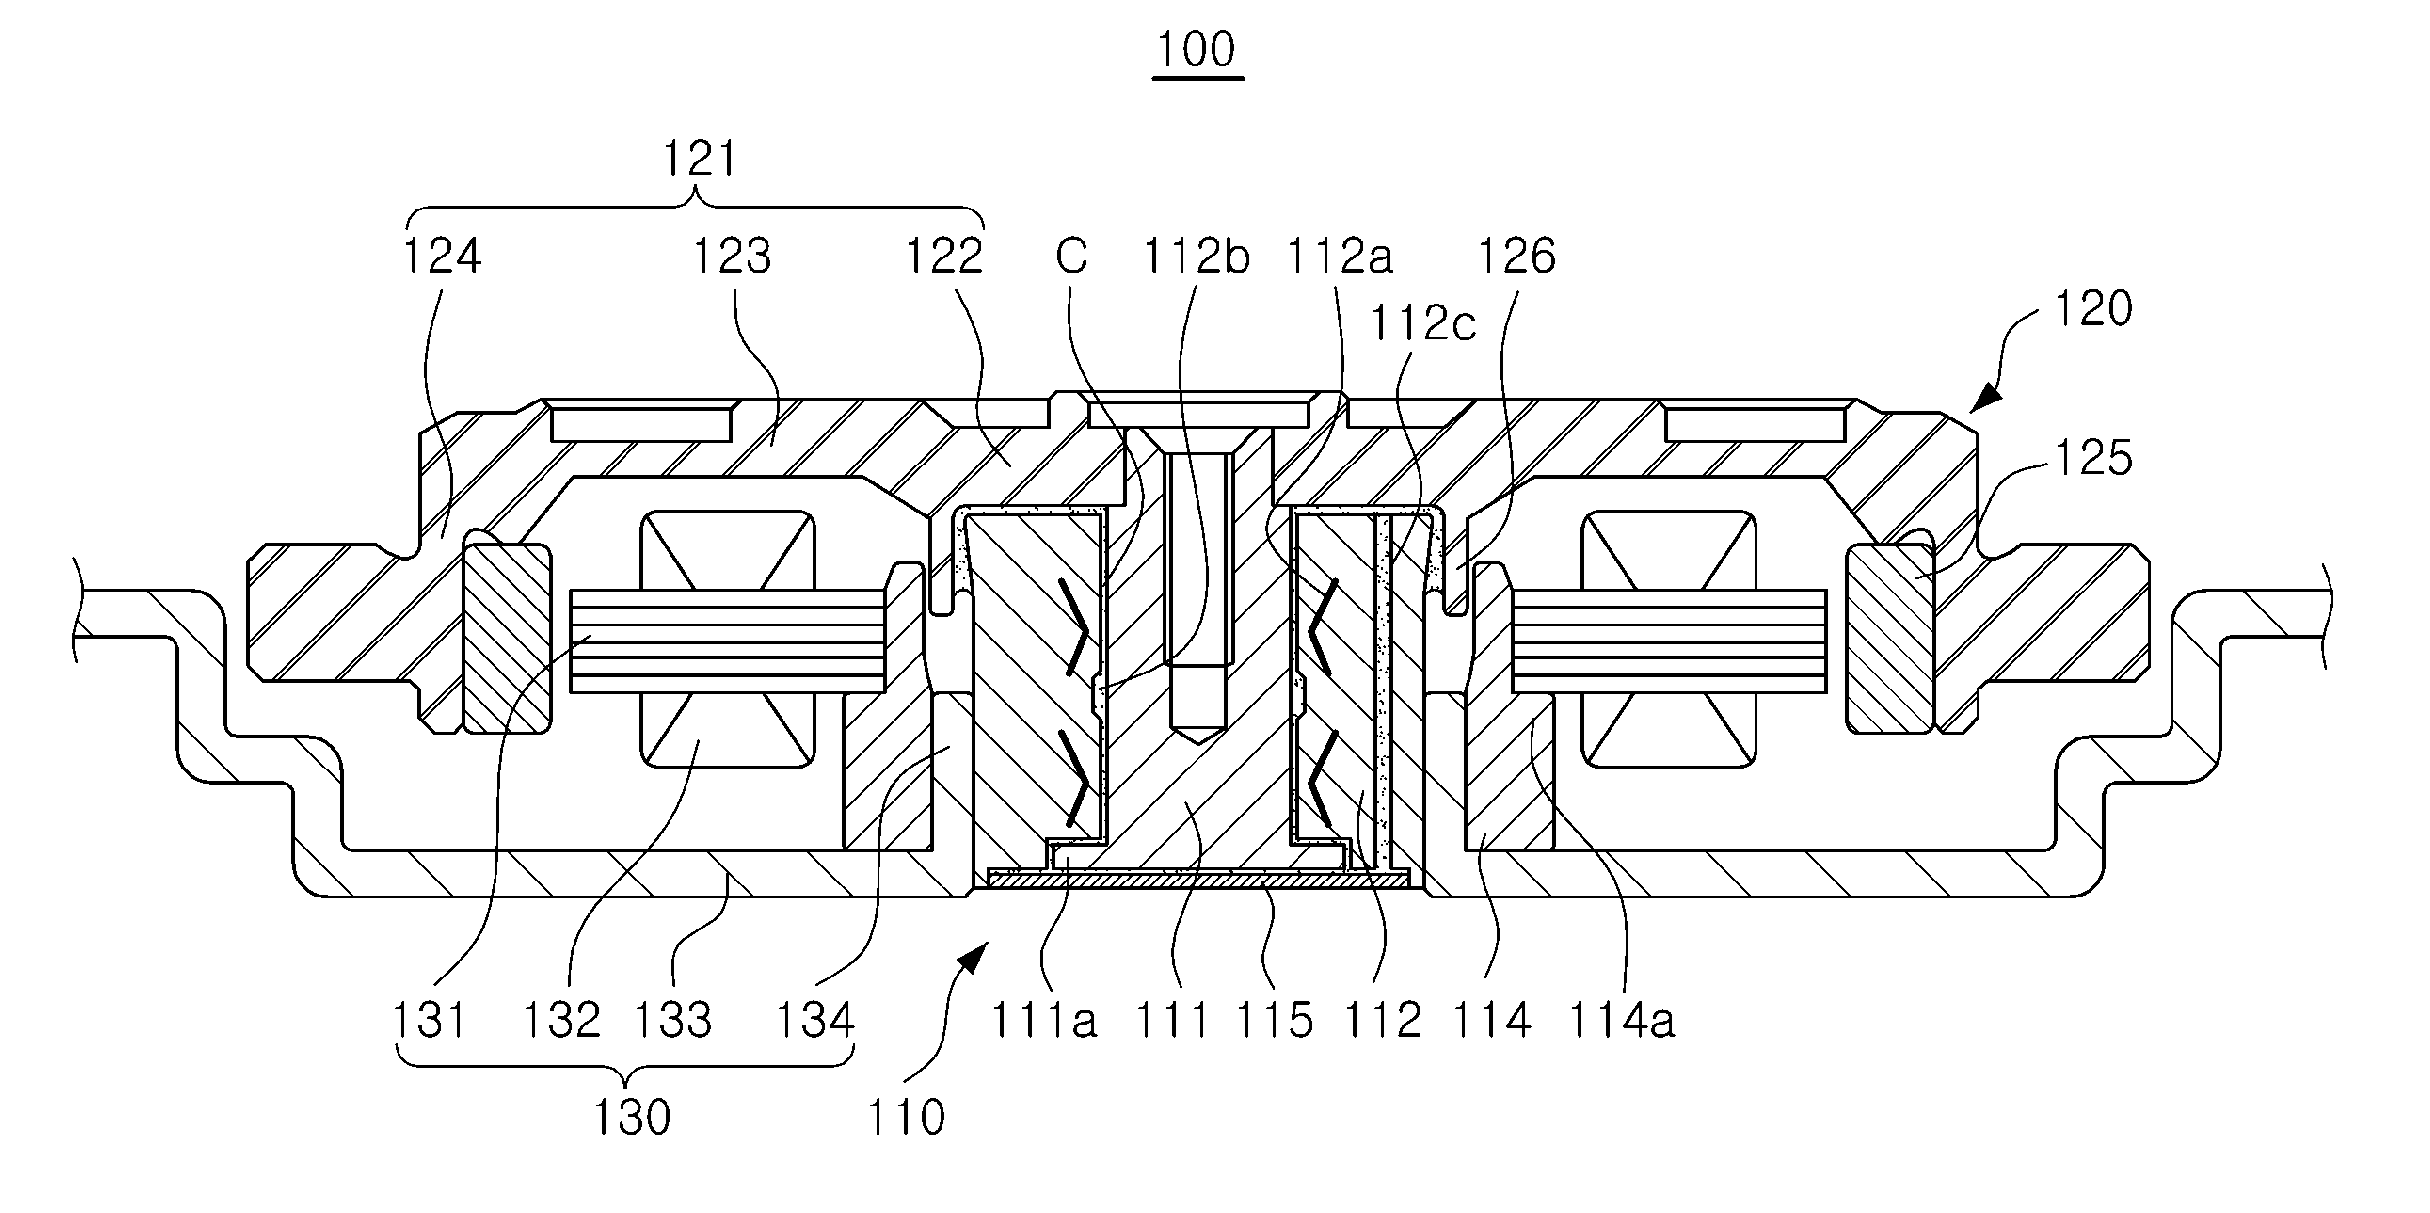 Spindle motor and hard disc drive including the same